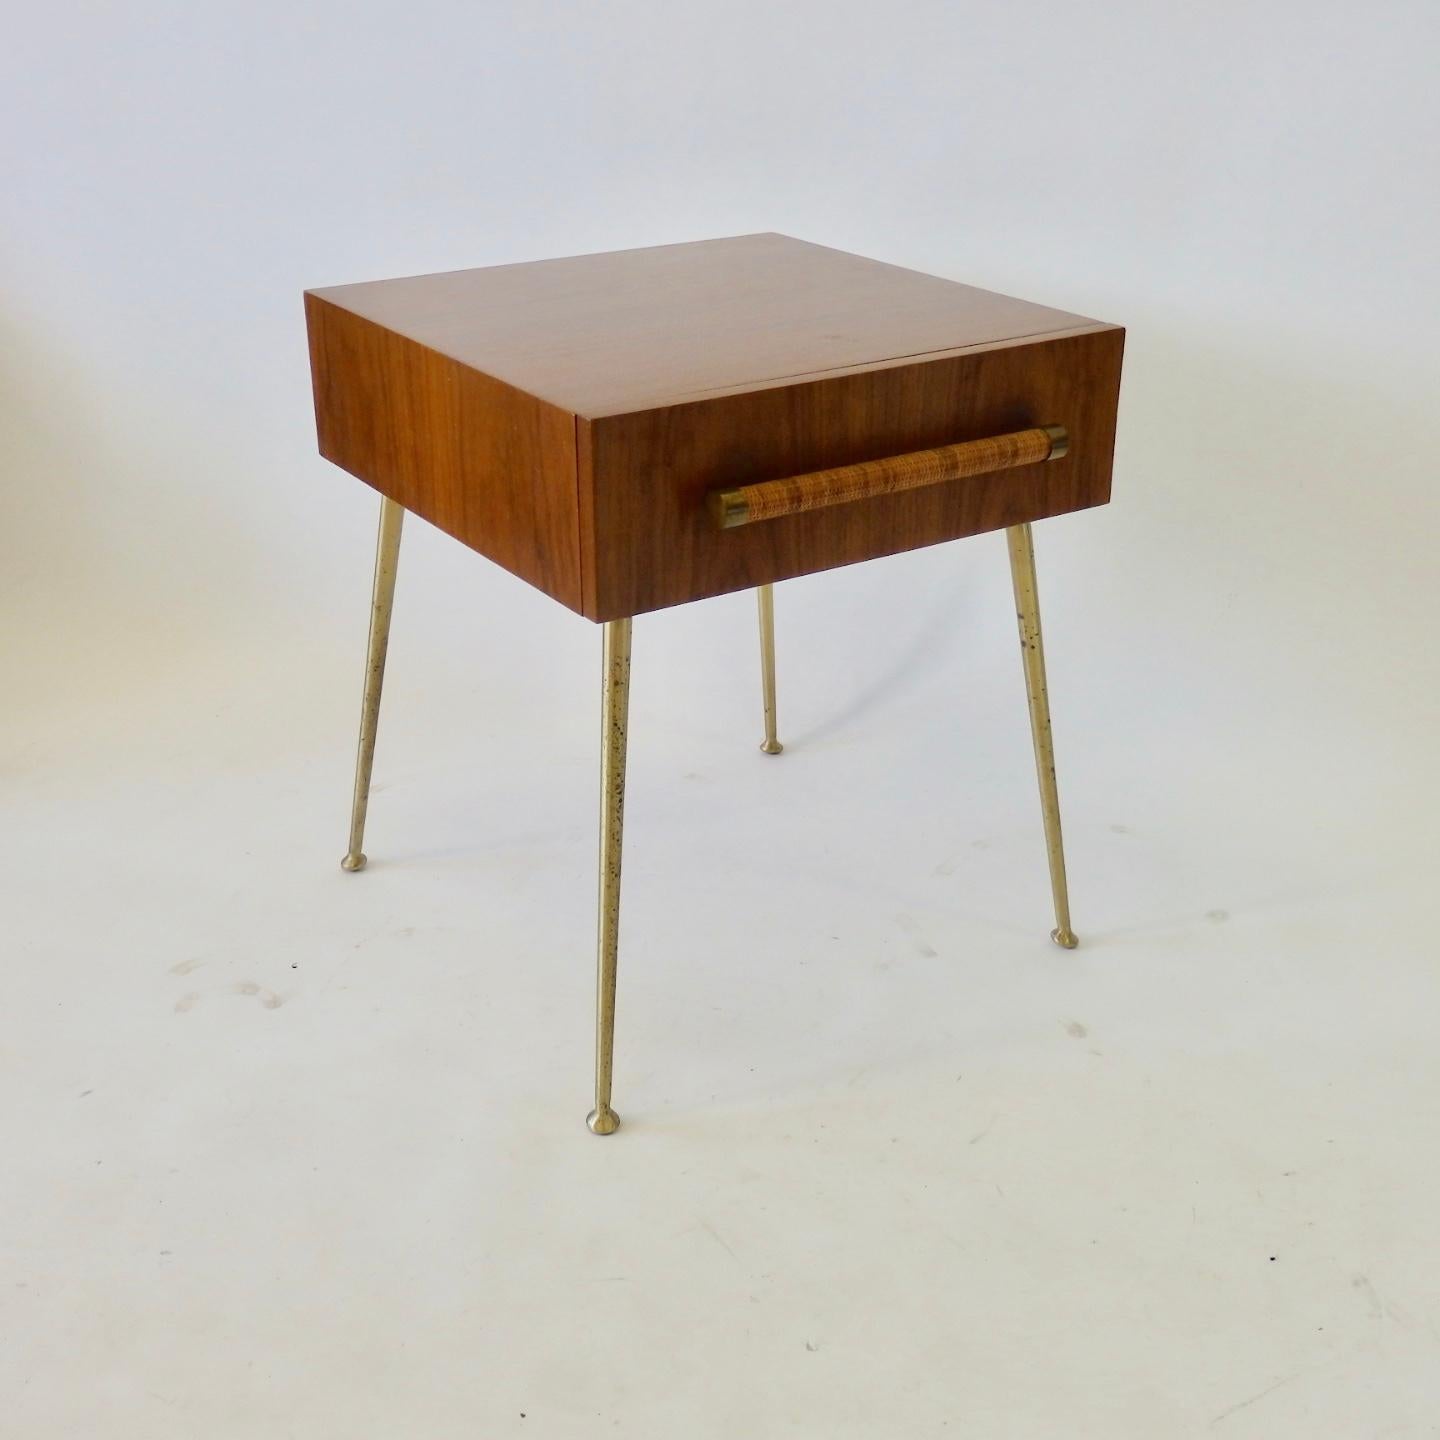 20th Century Robsjohn Gibbings Widdicomb Nightstand Side Table with Raffia Cane Covered Pull